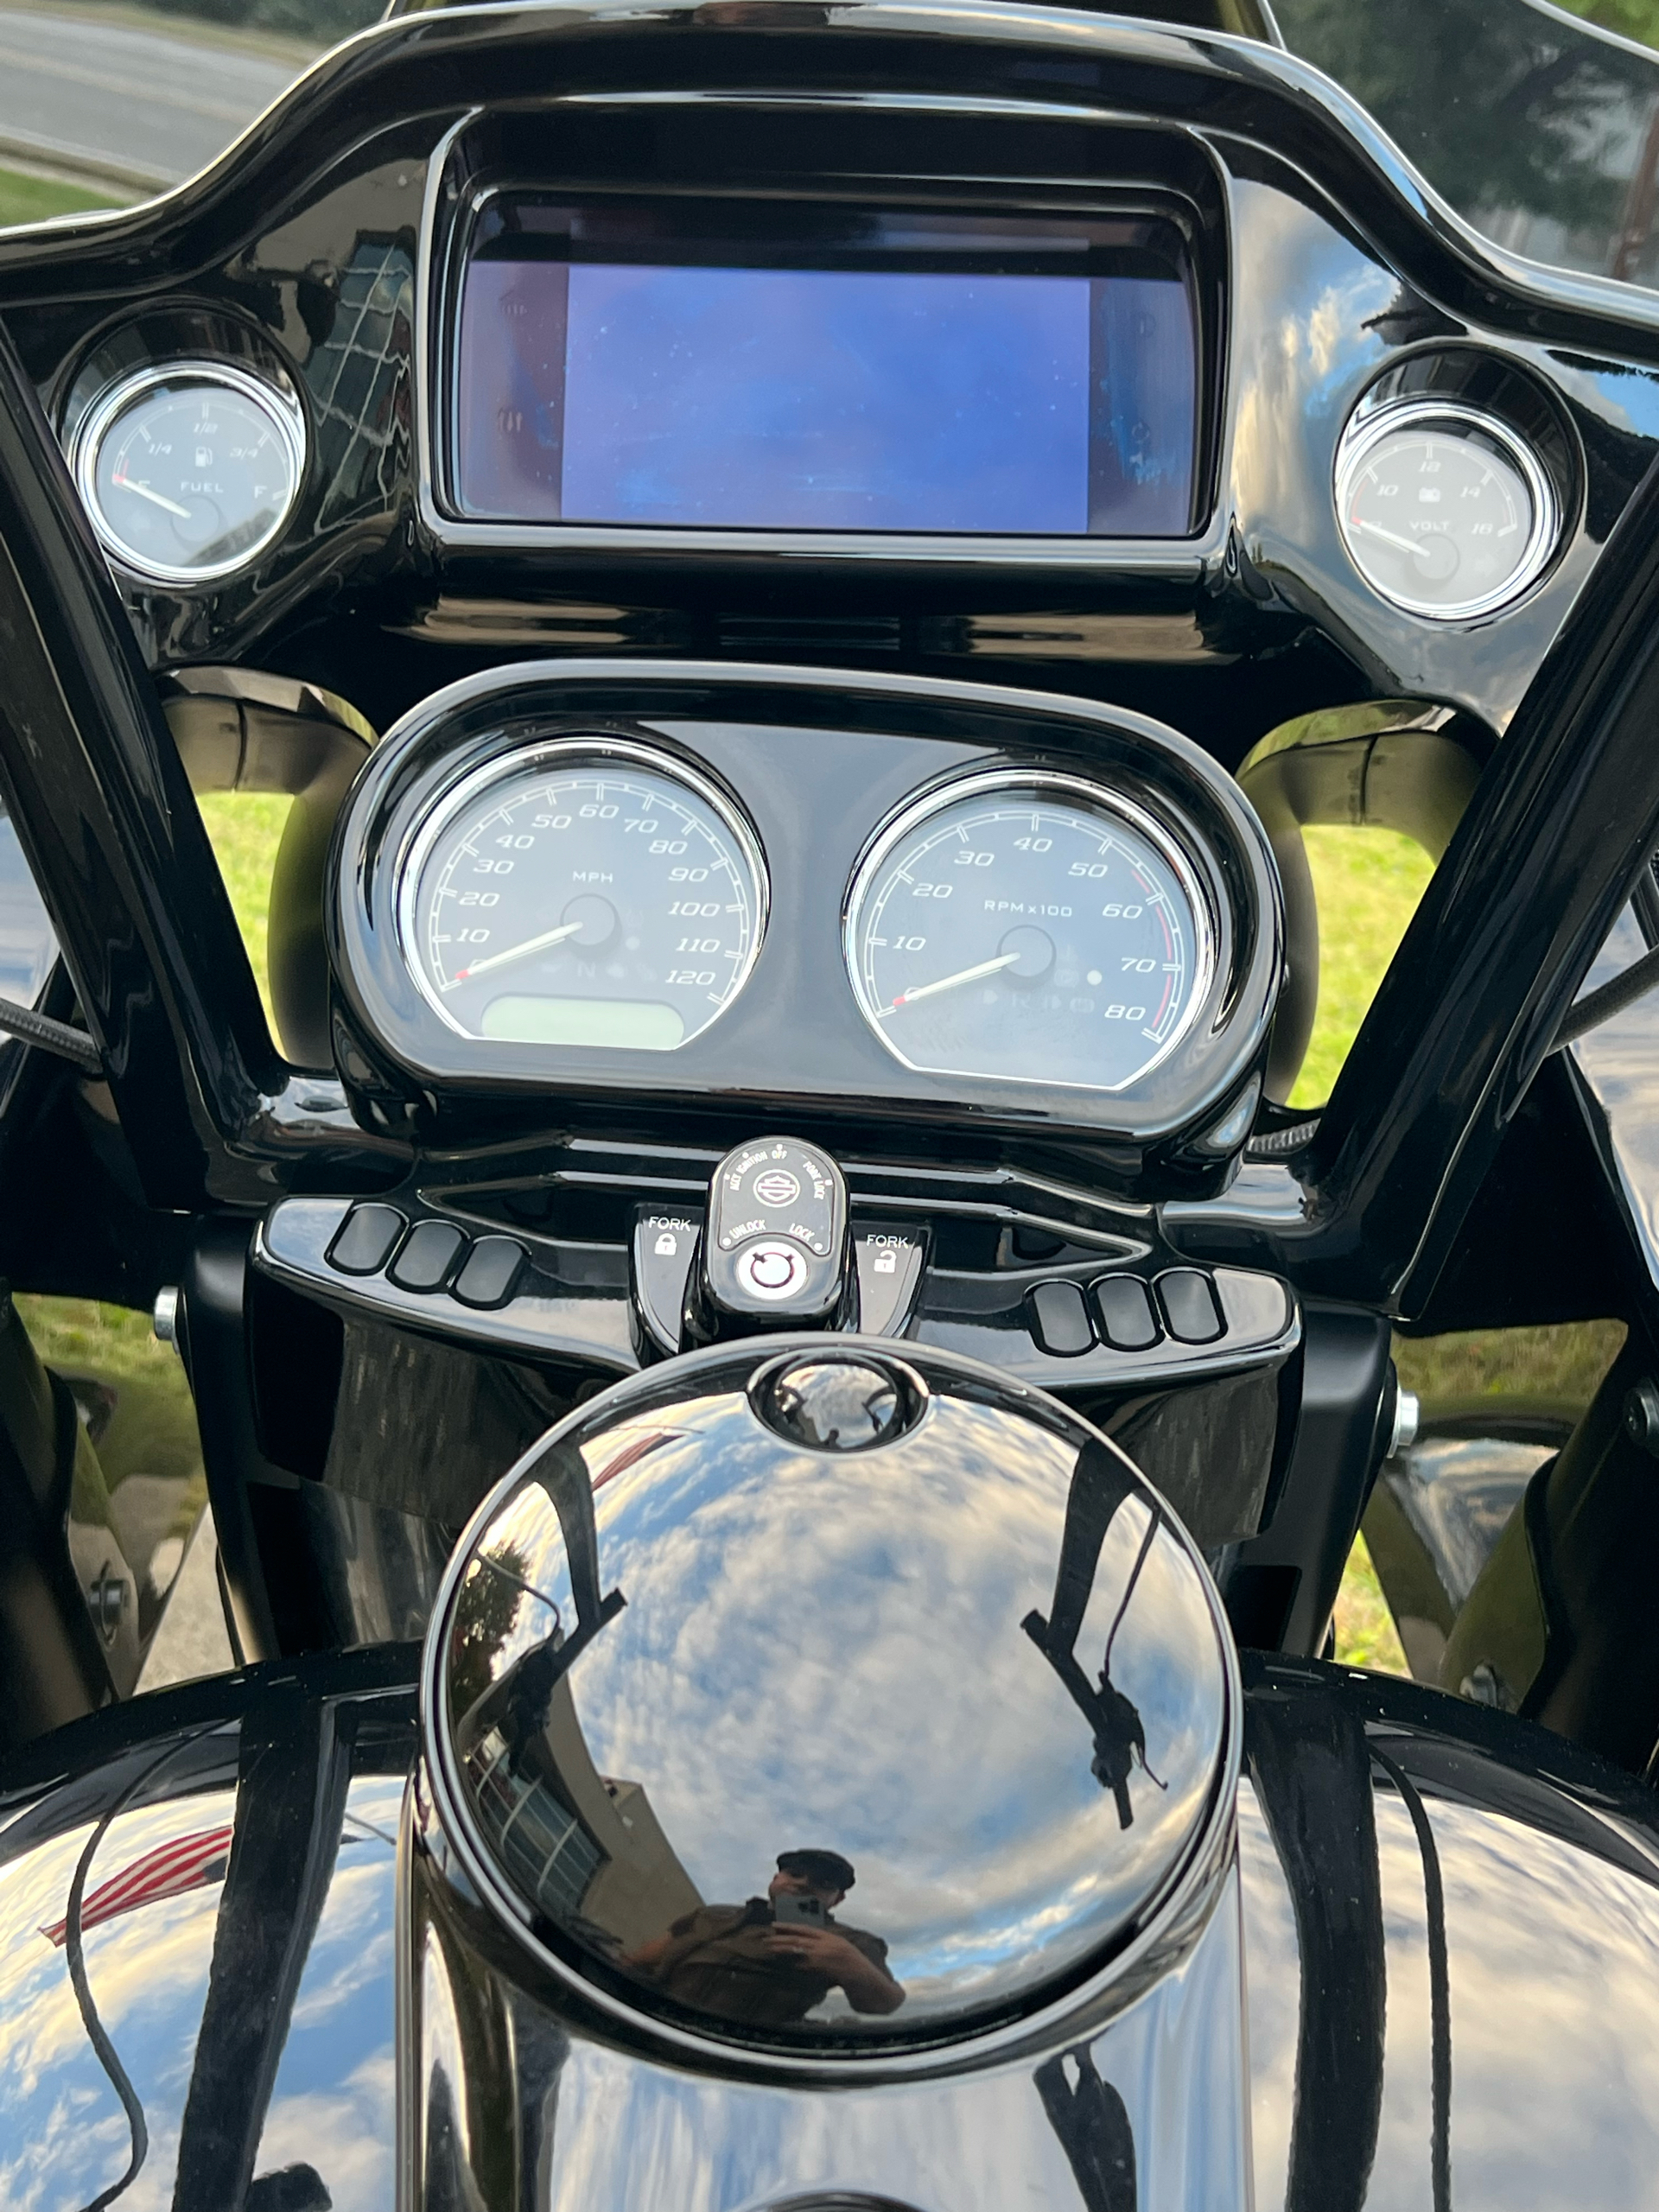 2020 Harley-Davidson ROAD GLIDE SPECIAL in Dumfries, Virginia - Photo 19